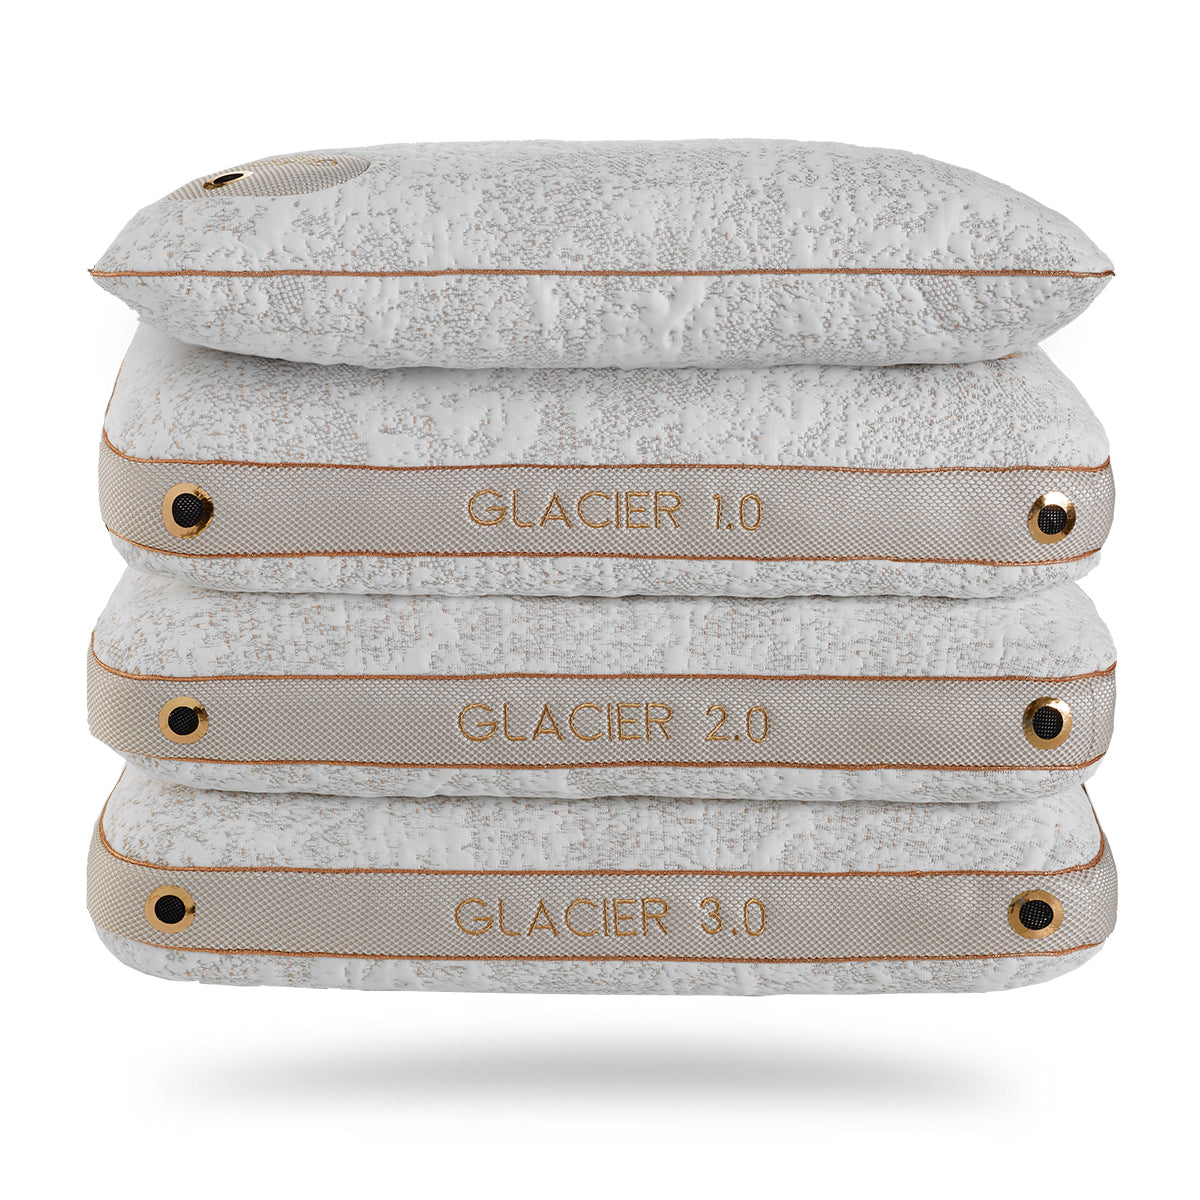 Bedgear Glacier Performance Pillows stacked  0.0, 1.0, 2.0, 3.0 from top to bottom